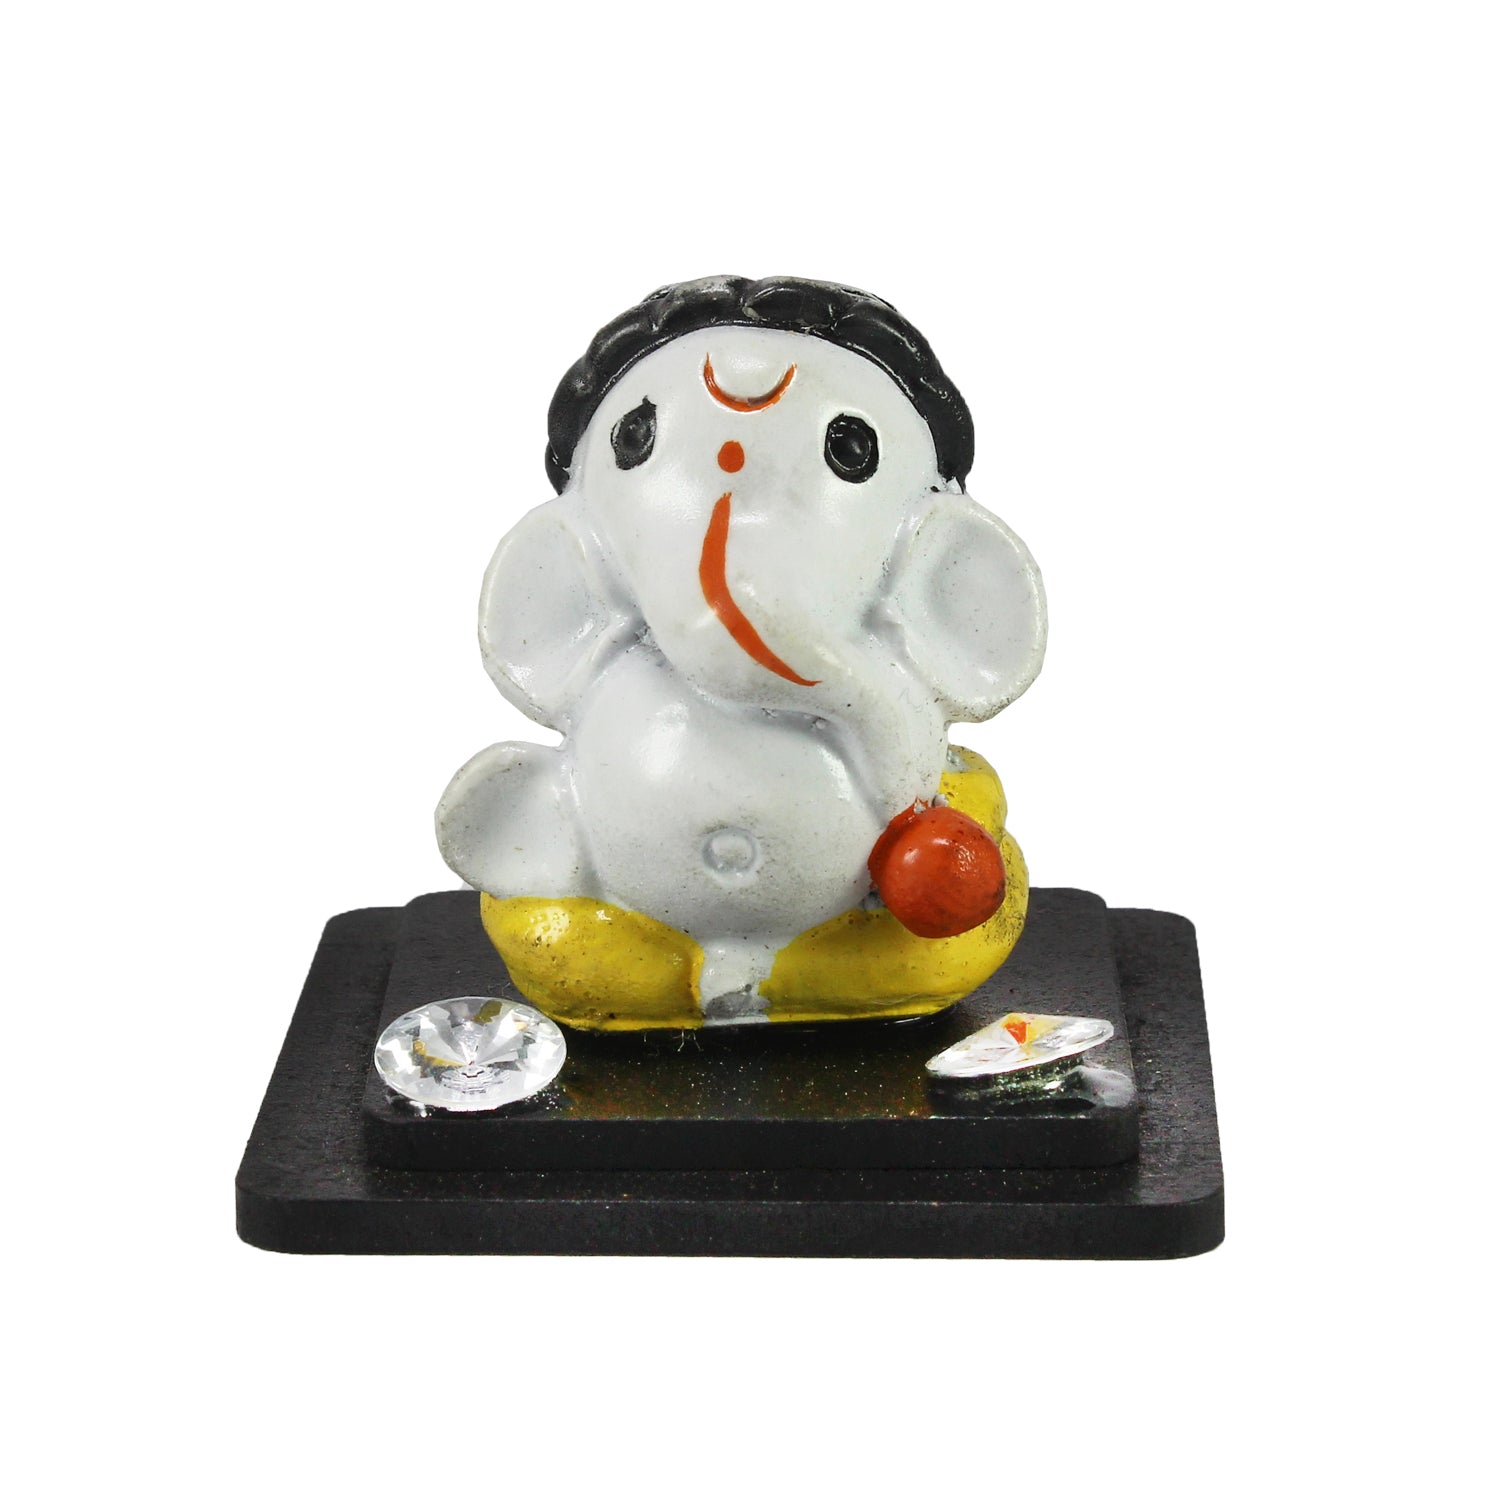 Decorative Lord Ganesha Showpiece for Car Dashboard, Home Temple and Office Desks 1